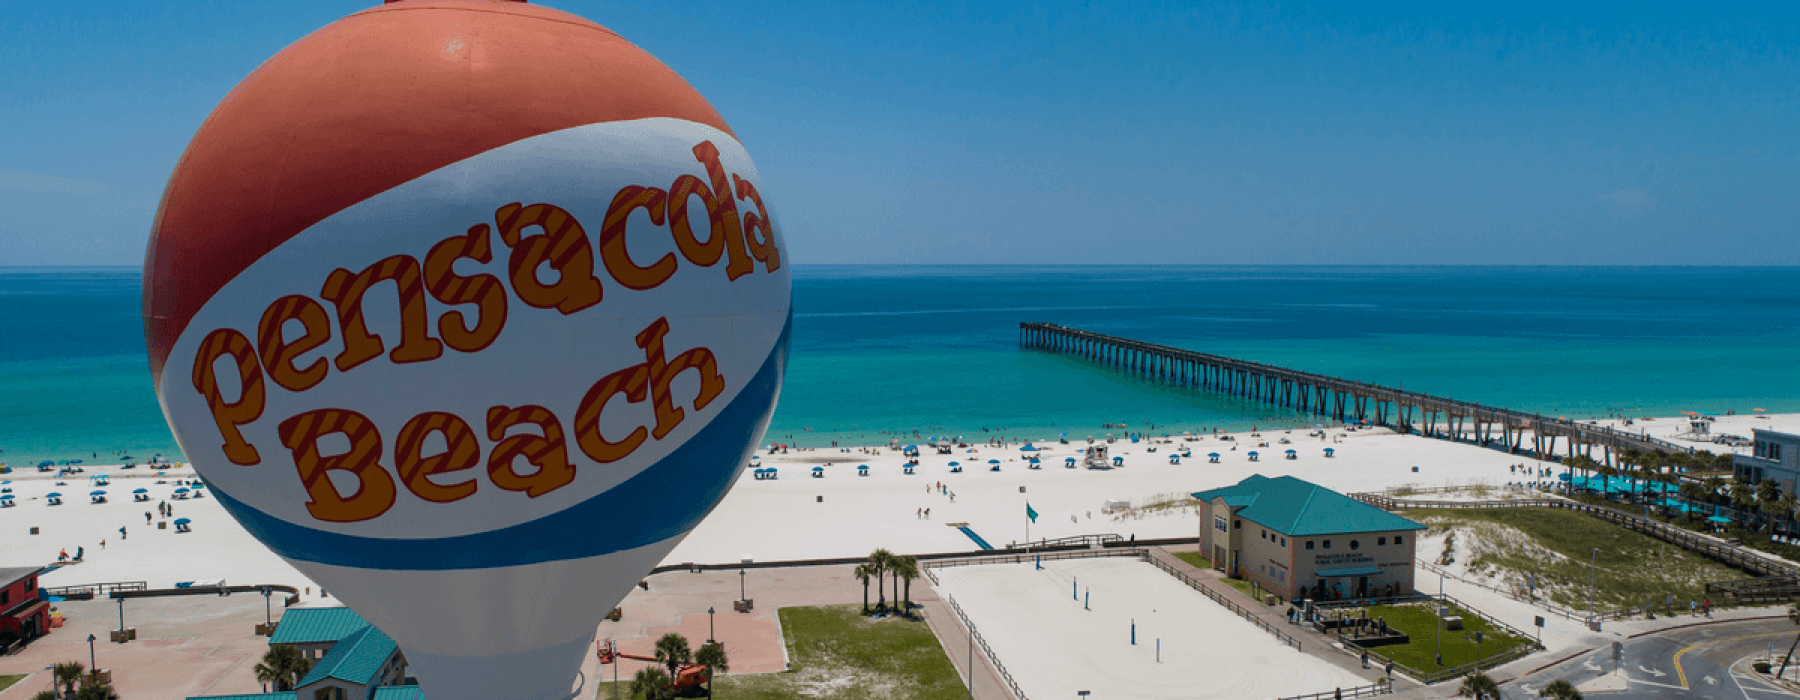 Things to Do in Pensacola